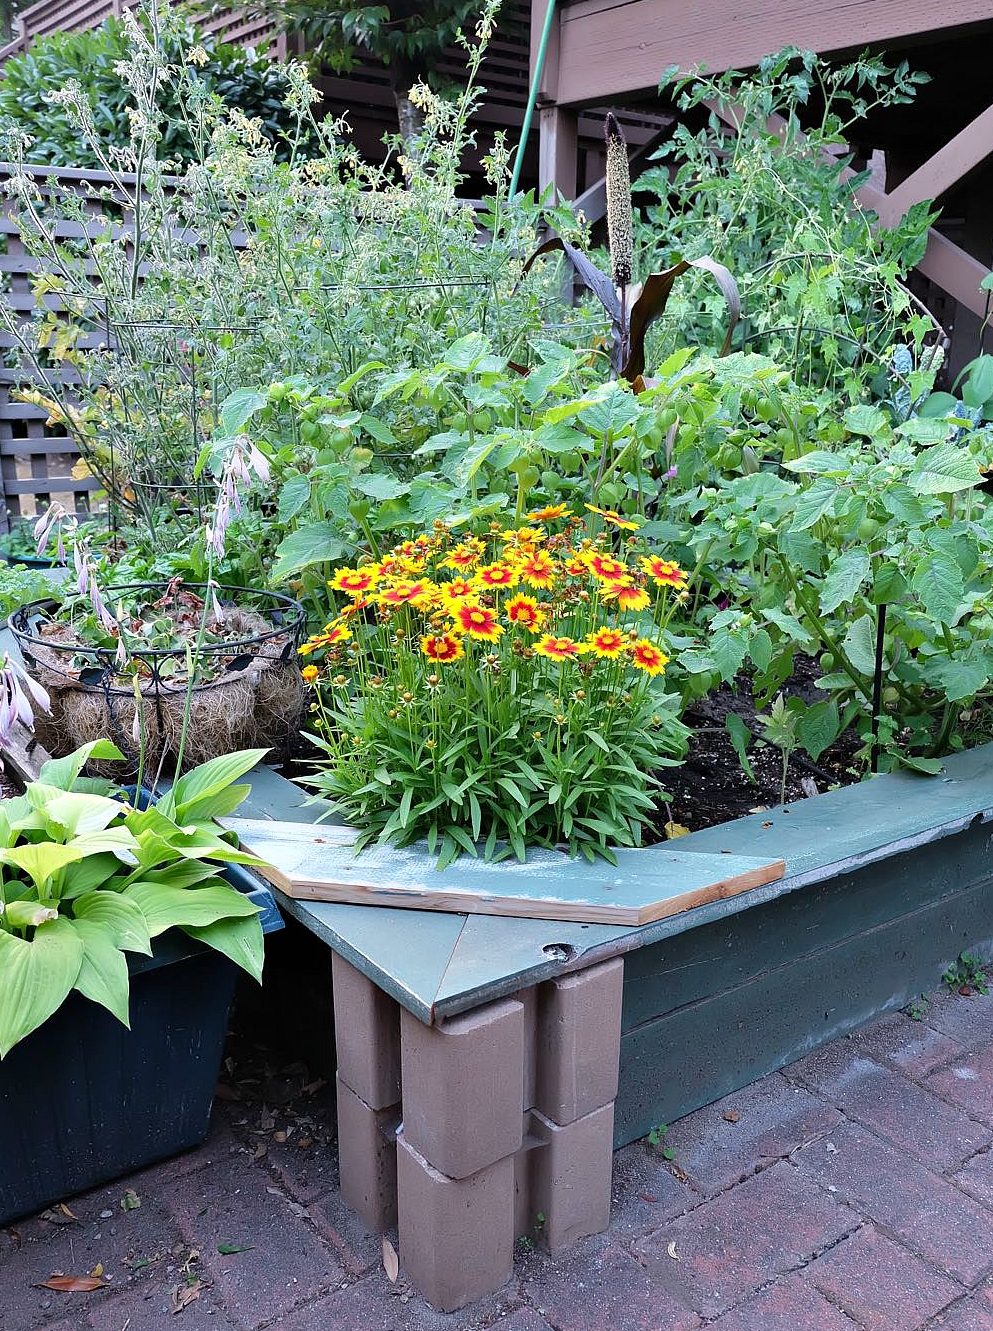 Expand your patio garden or backyard garden with this easy DIY planter box from Hello Creative Family. No power tools required, this planter box can be made in an hour or less in a small space, large space or any size in between. Includes step by step instructions. #Gardening #PatioGardening #SmallSpaceGardening #DIY